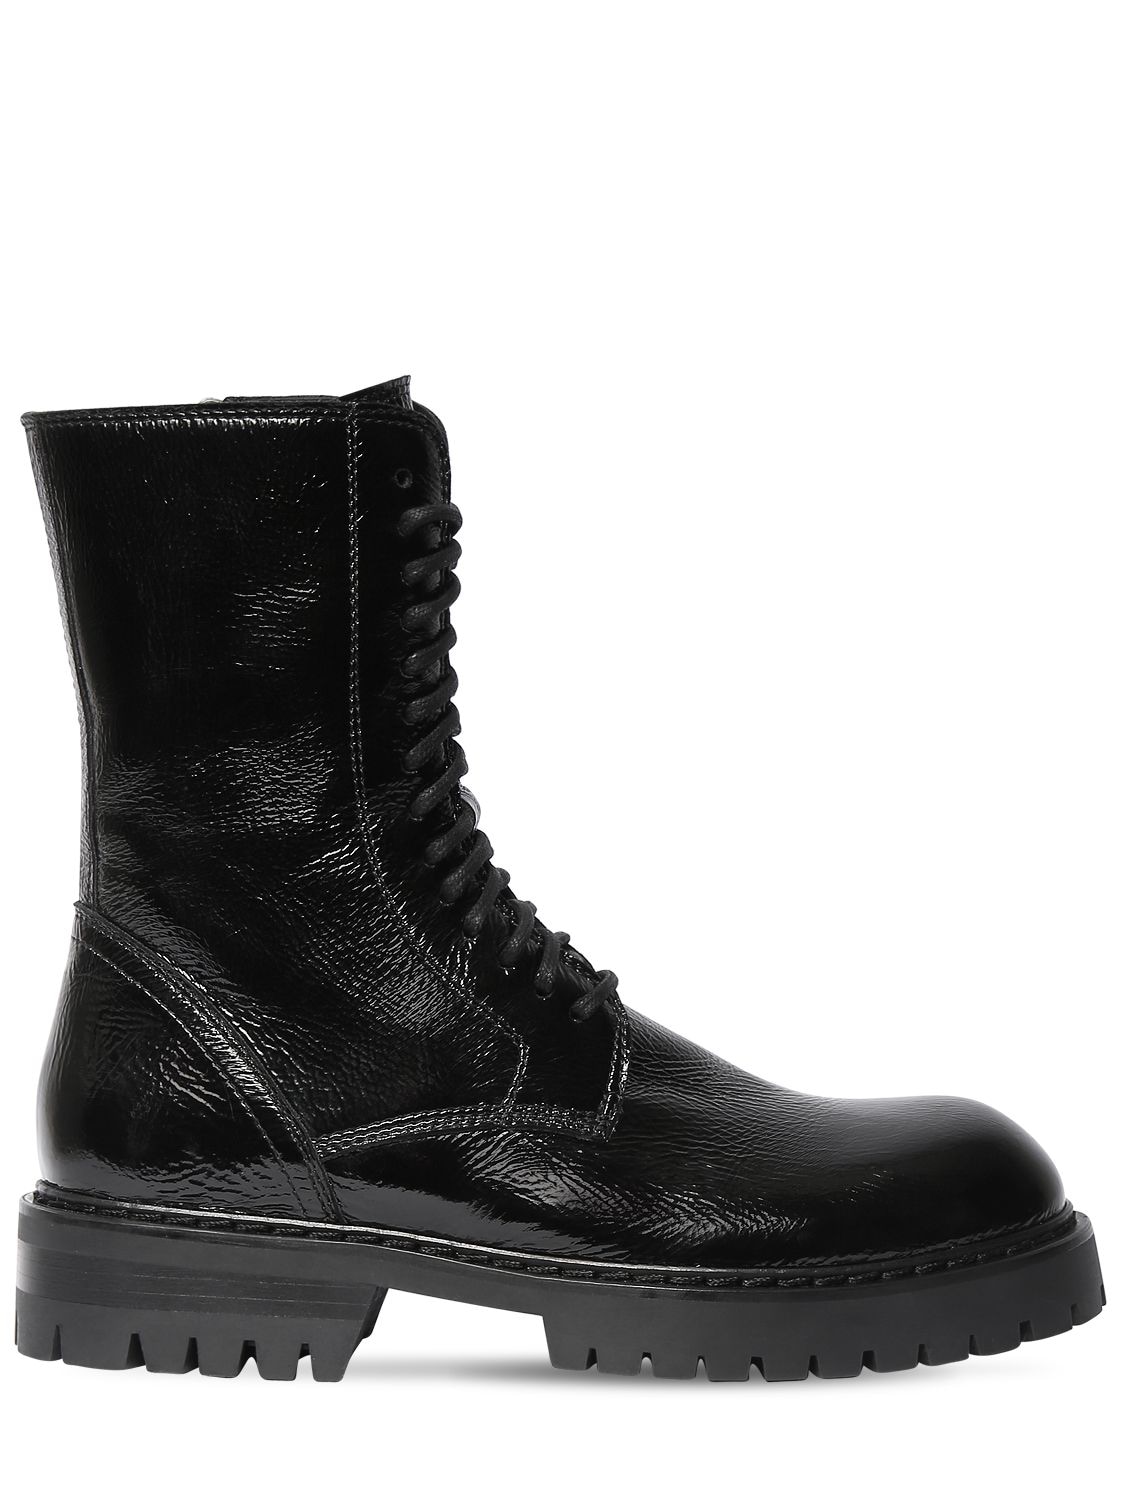 ANN DEMEULEMEESTER 40mm Vintage Leather Combat Boots